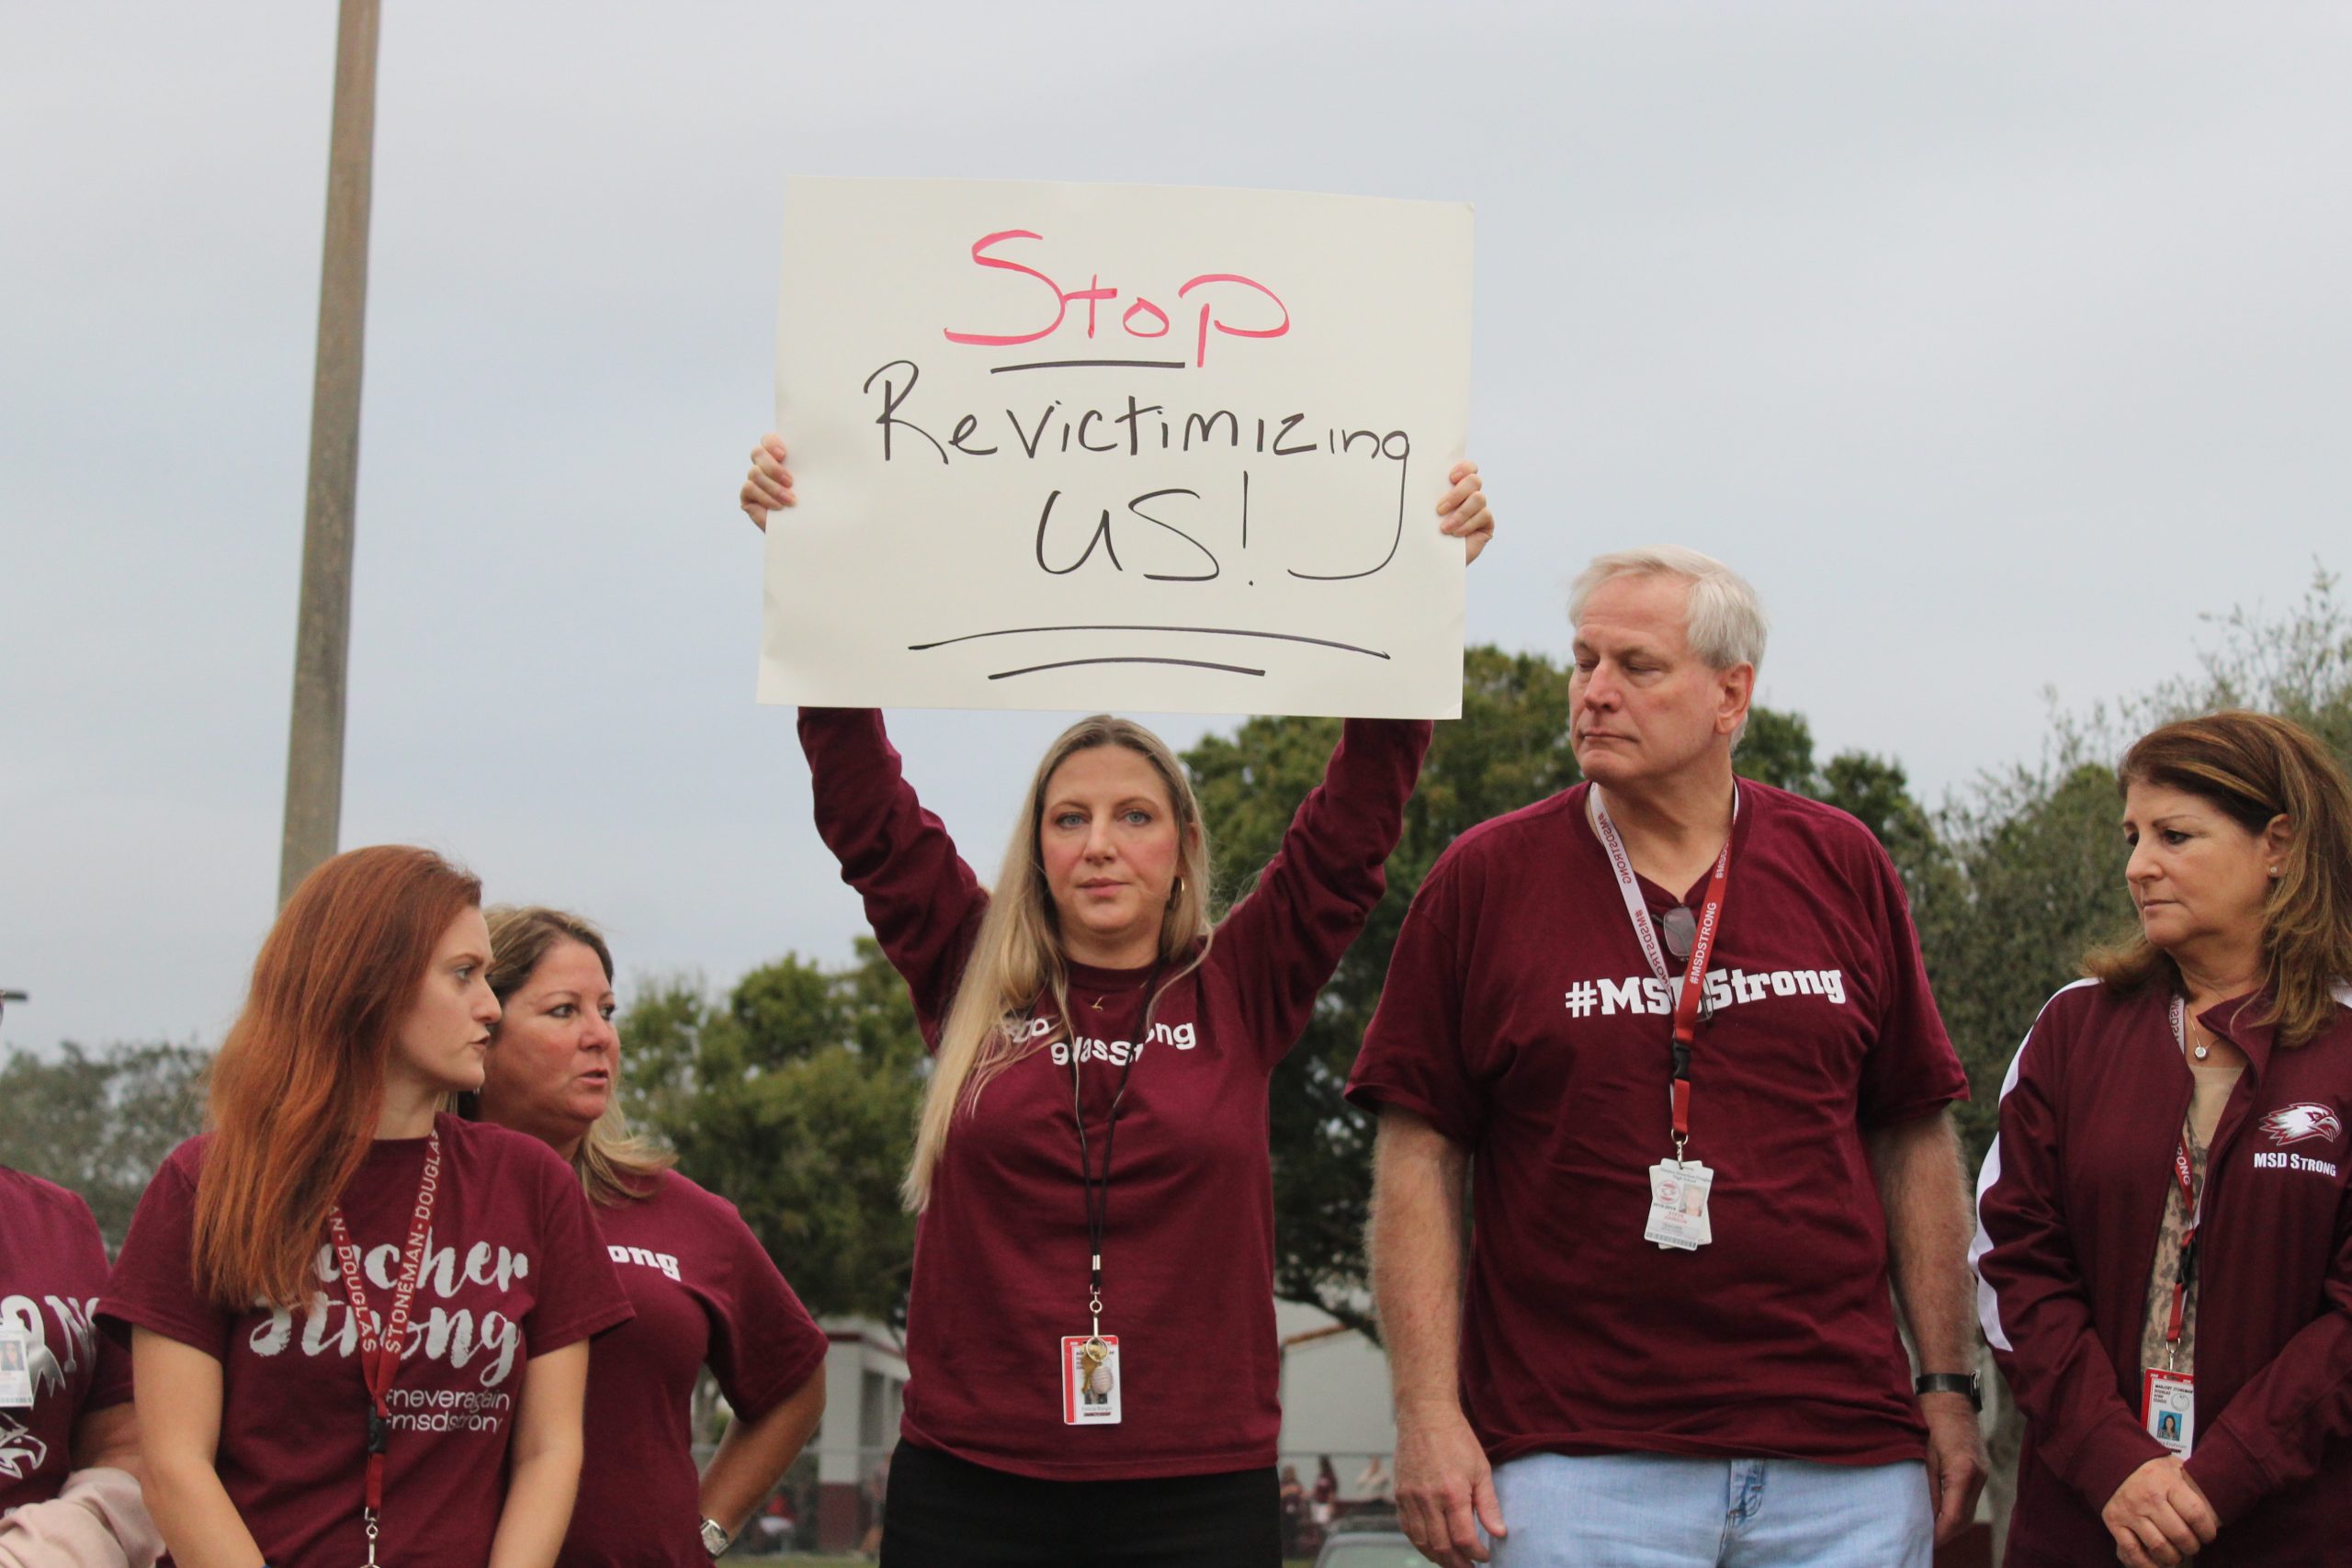 English teacher Felicia Burgin protests in front of MSD with other teachers. Photo by Nyan Clarke